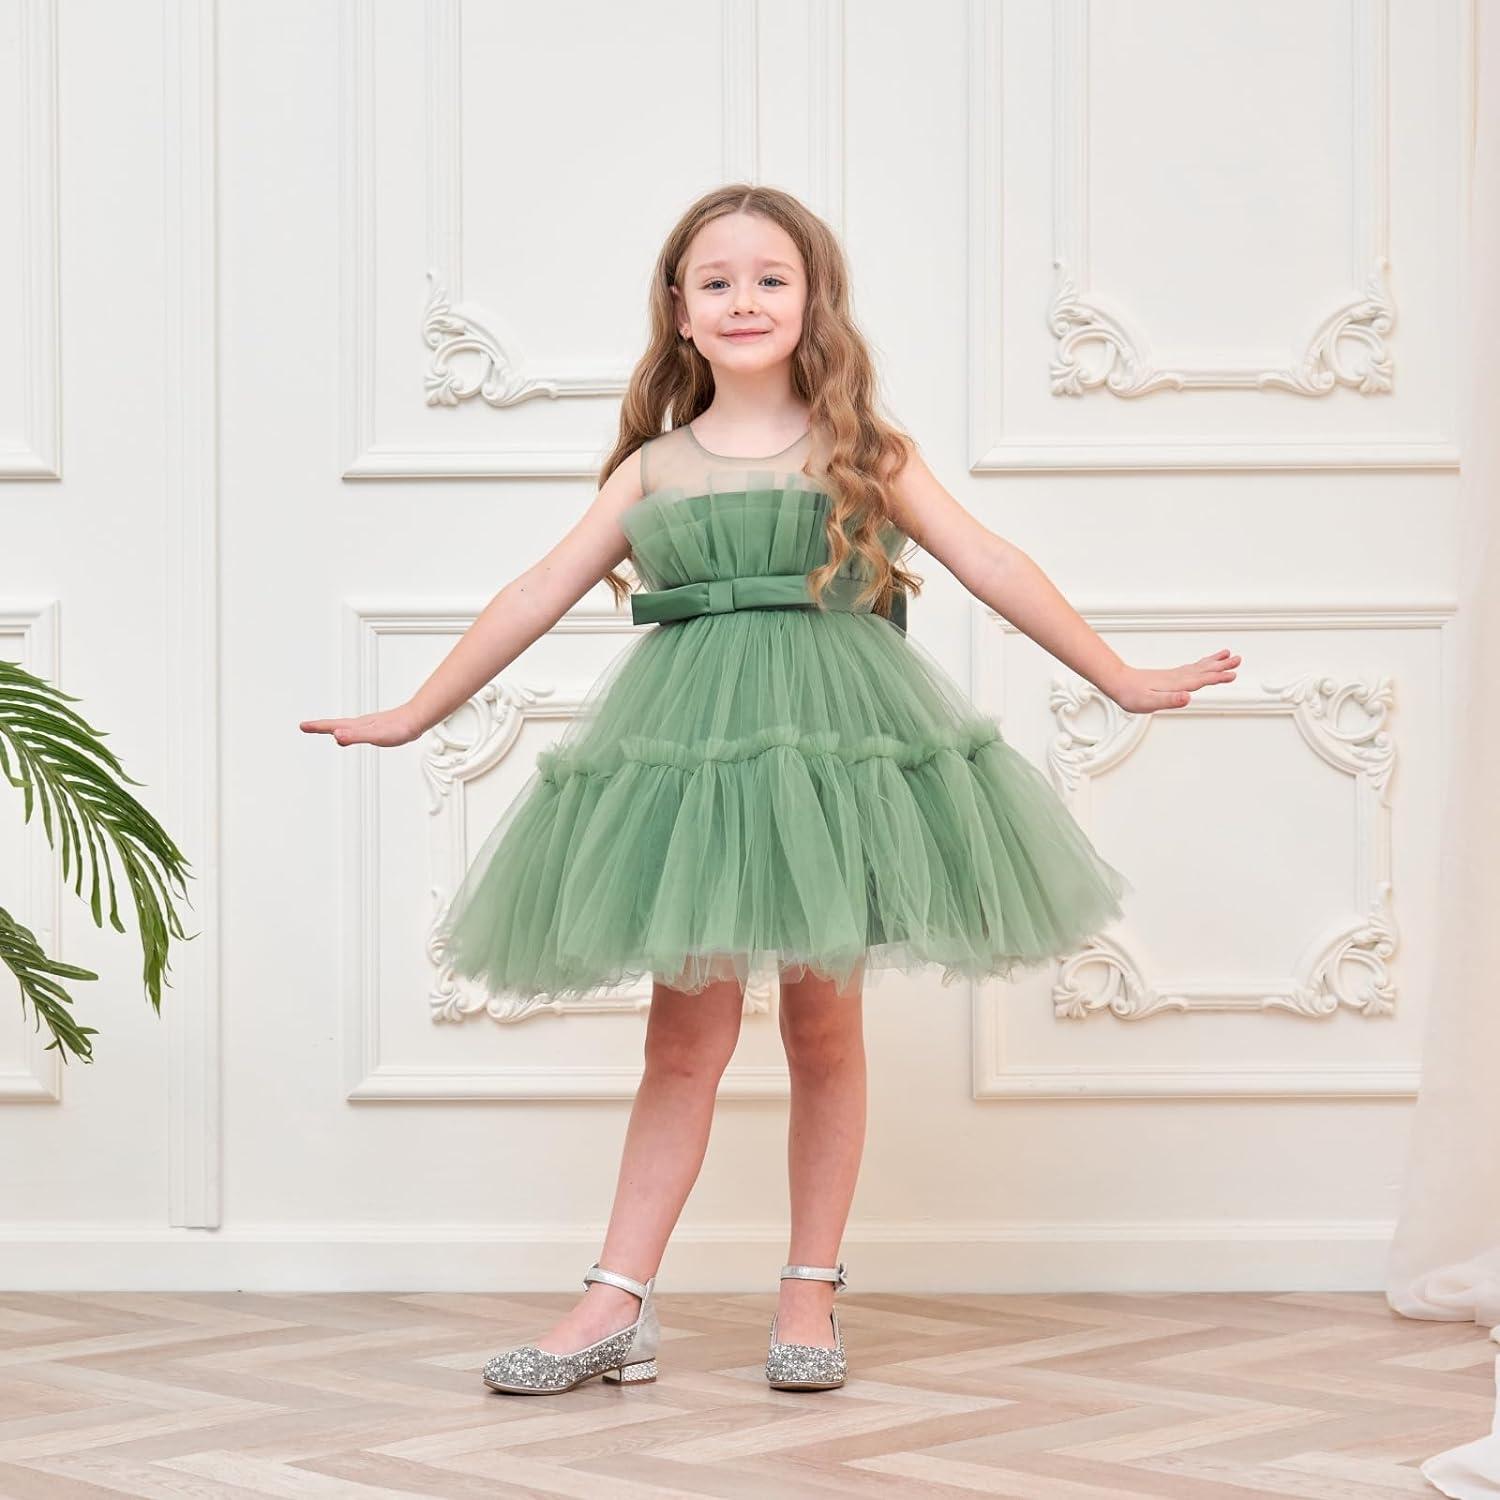 Elegant Flower Girl Wedding & Birthday Princess Dress Princess Style For  Kids Available In Sizes 5 12 Years W0224 From Liancheng05, $17.65 |  DHgate.Com